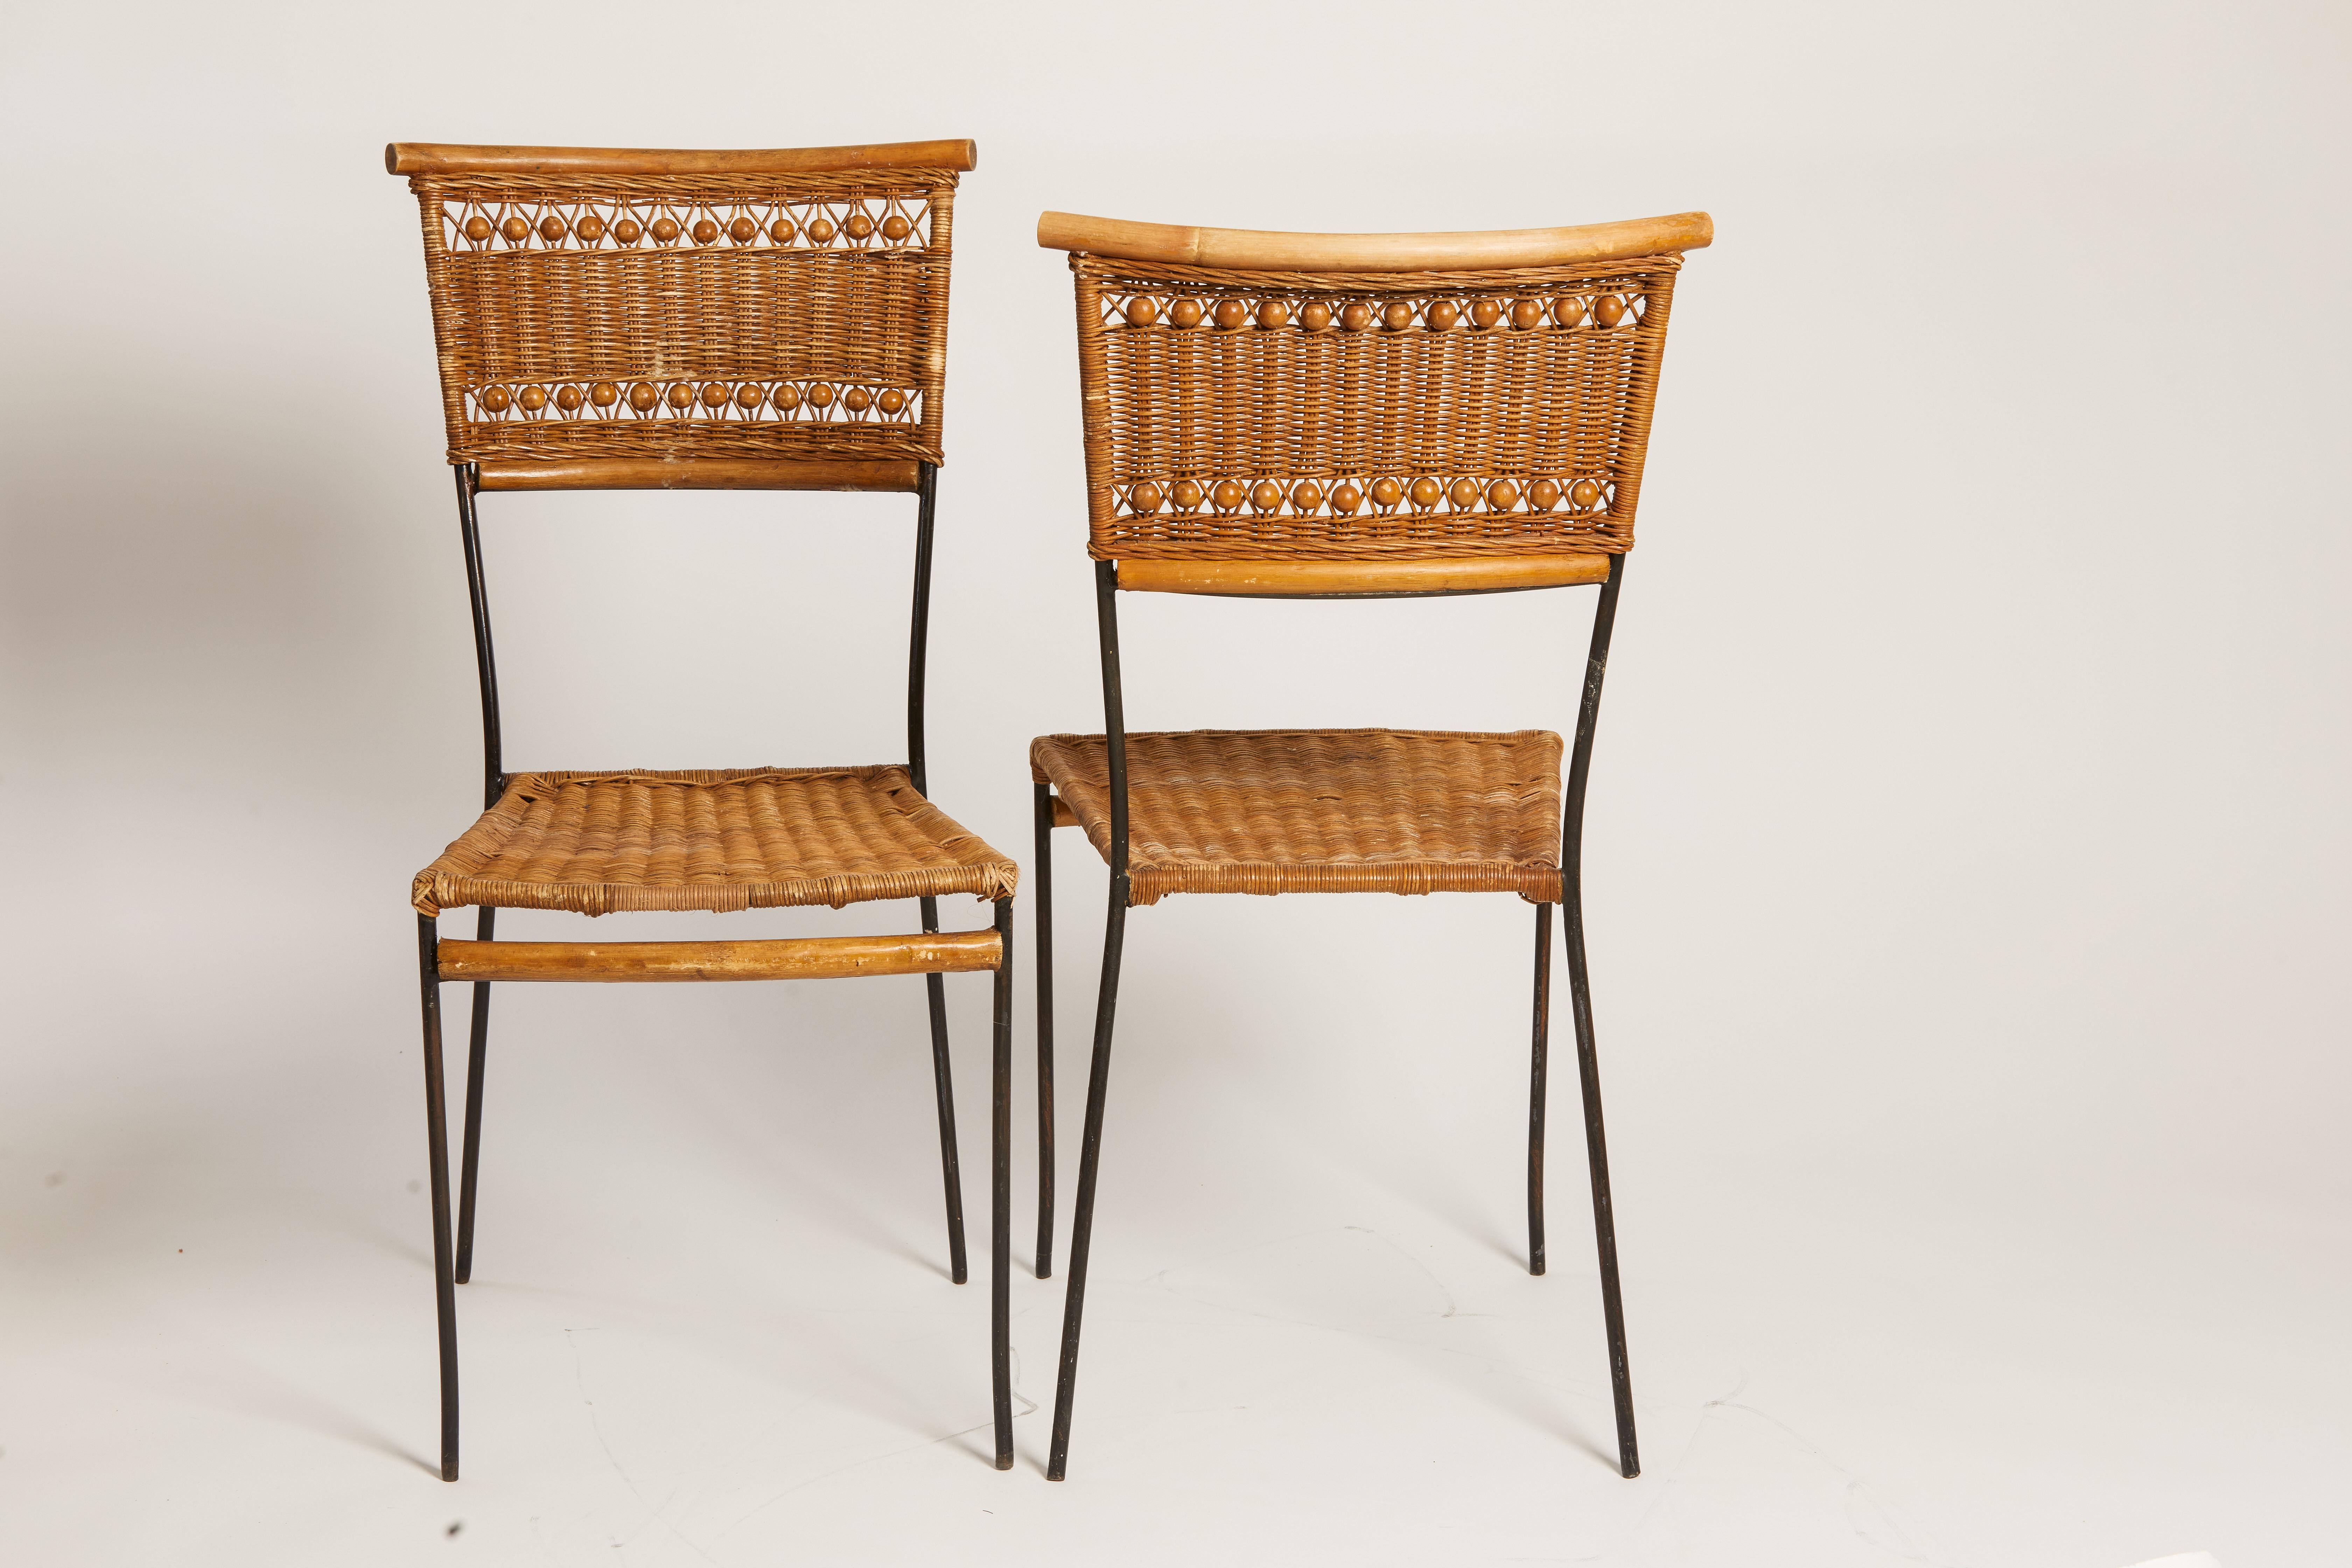 1970s French pair of decorative raffia chairs with wooden beads and black metal detailing.